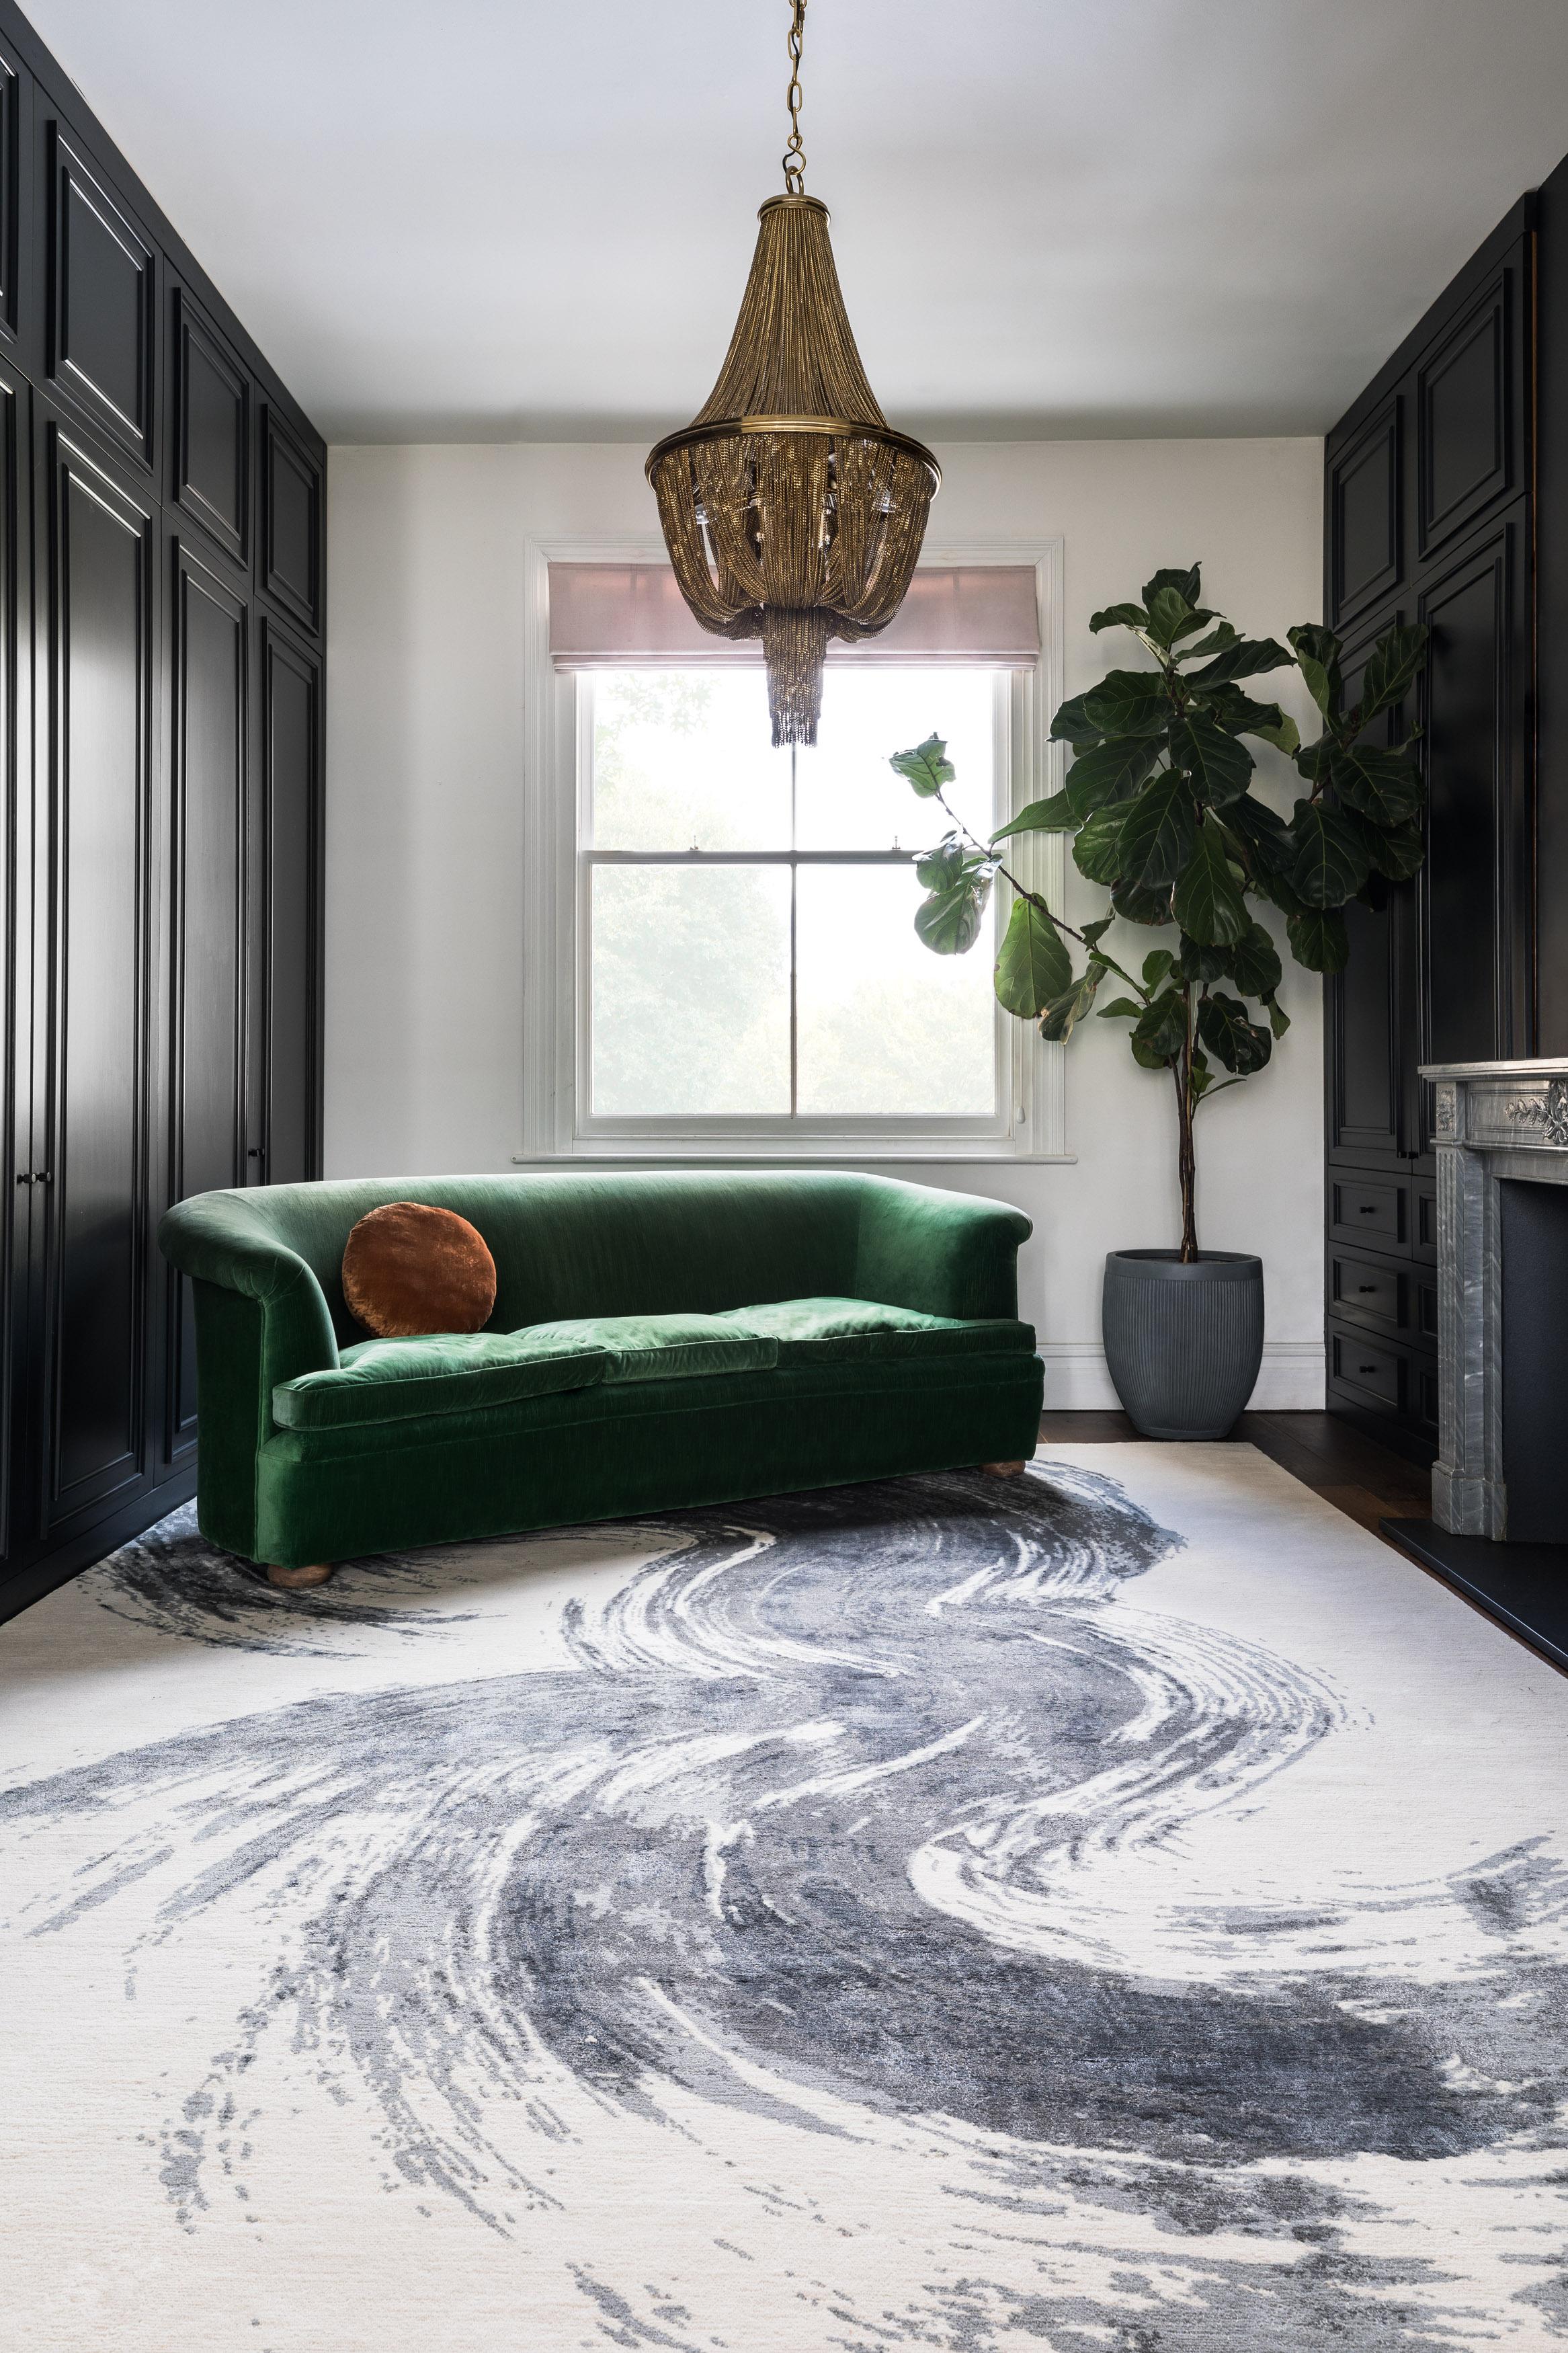 Crafted in a wool base, the motif has been woven entirely in silk and appears to drift and fade as if a brush has gently traversed the composition of the design. This impression of movement is inspired by New York’s Hudson River and its